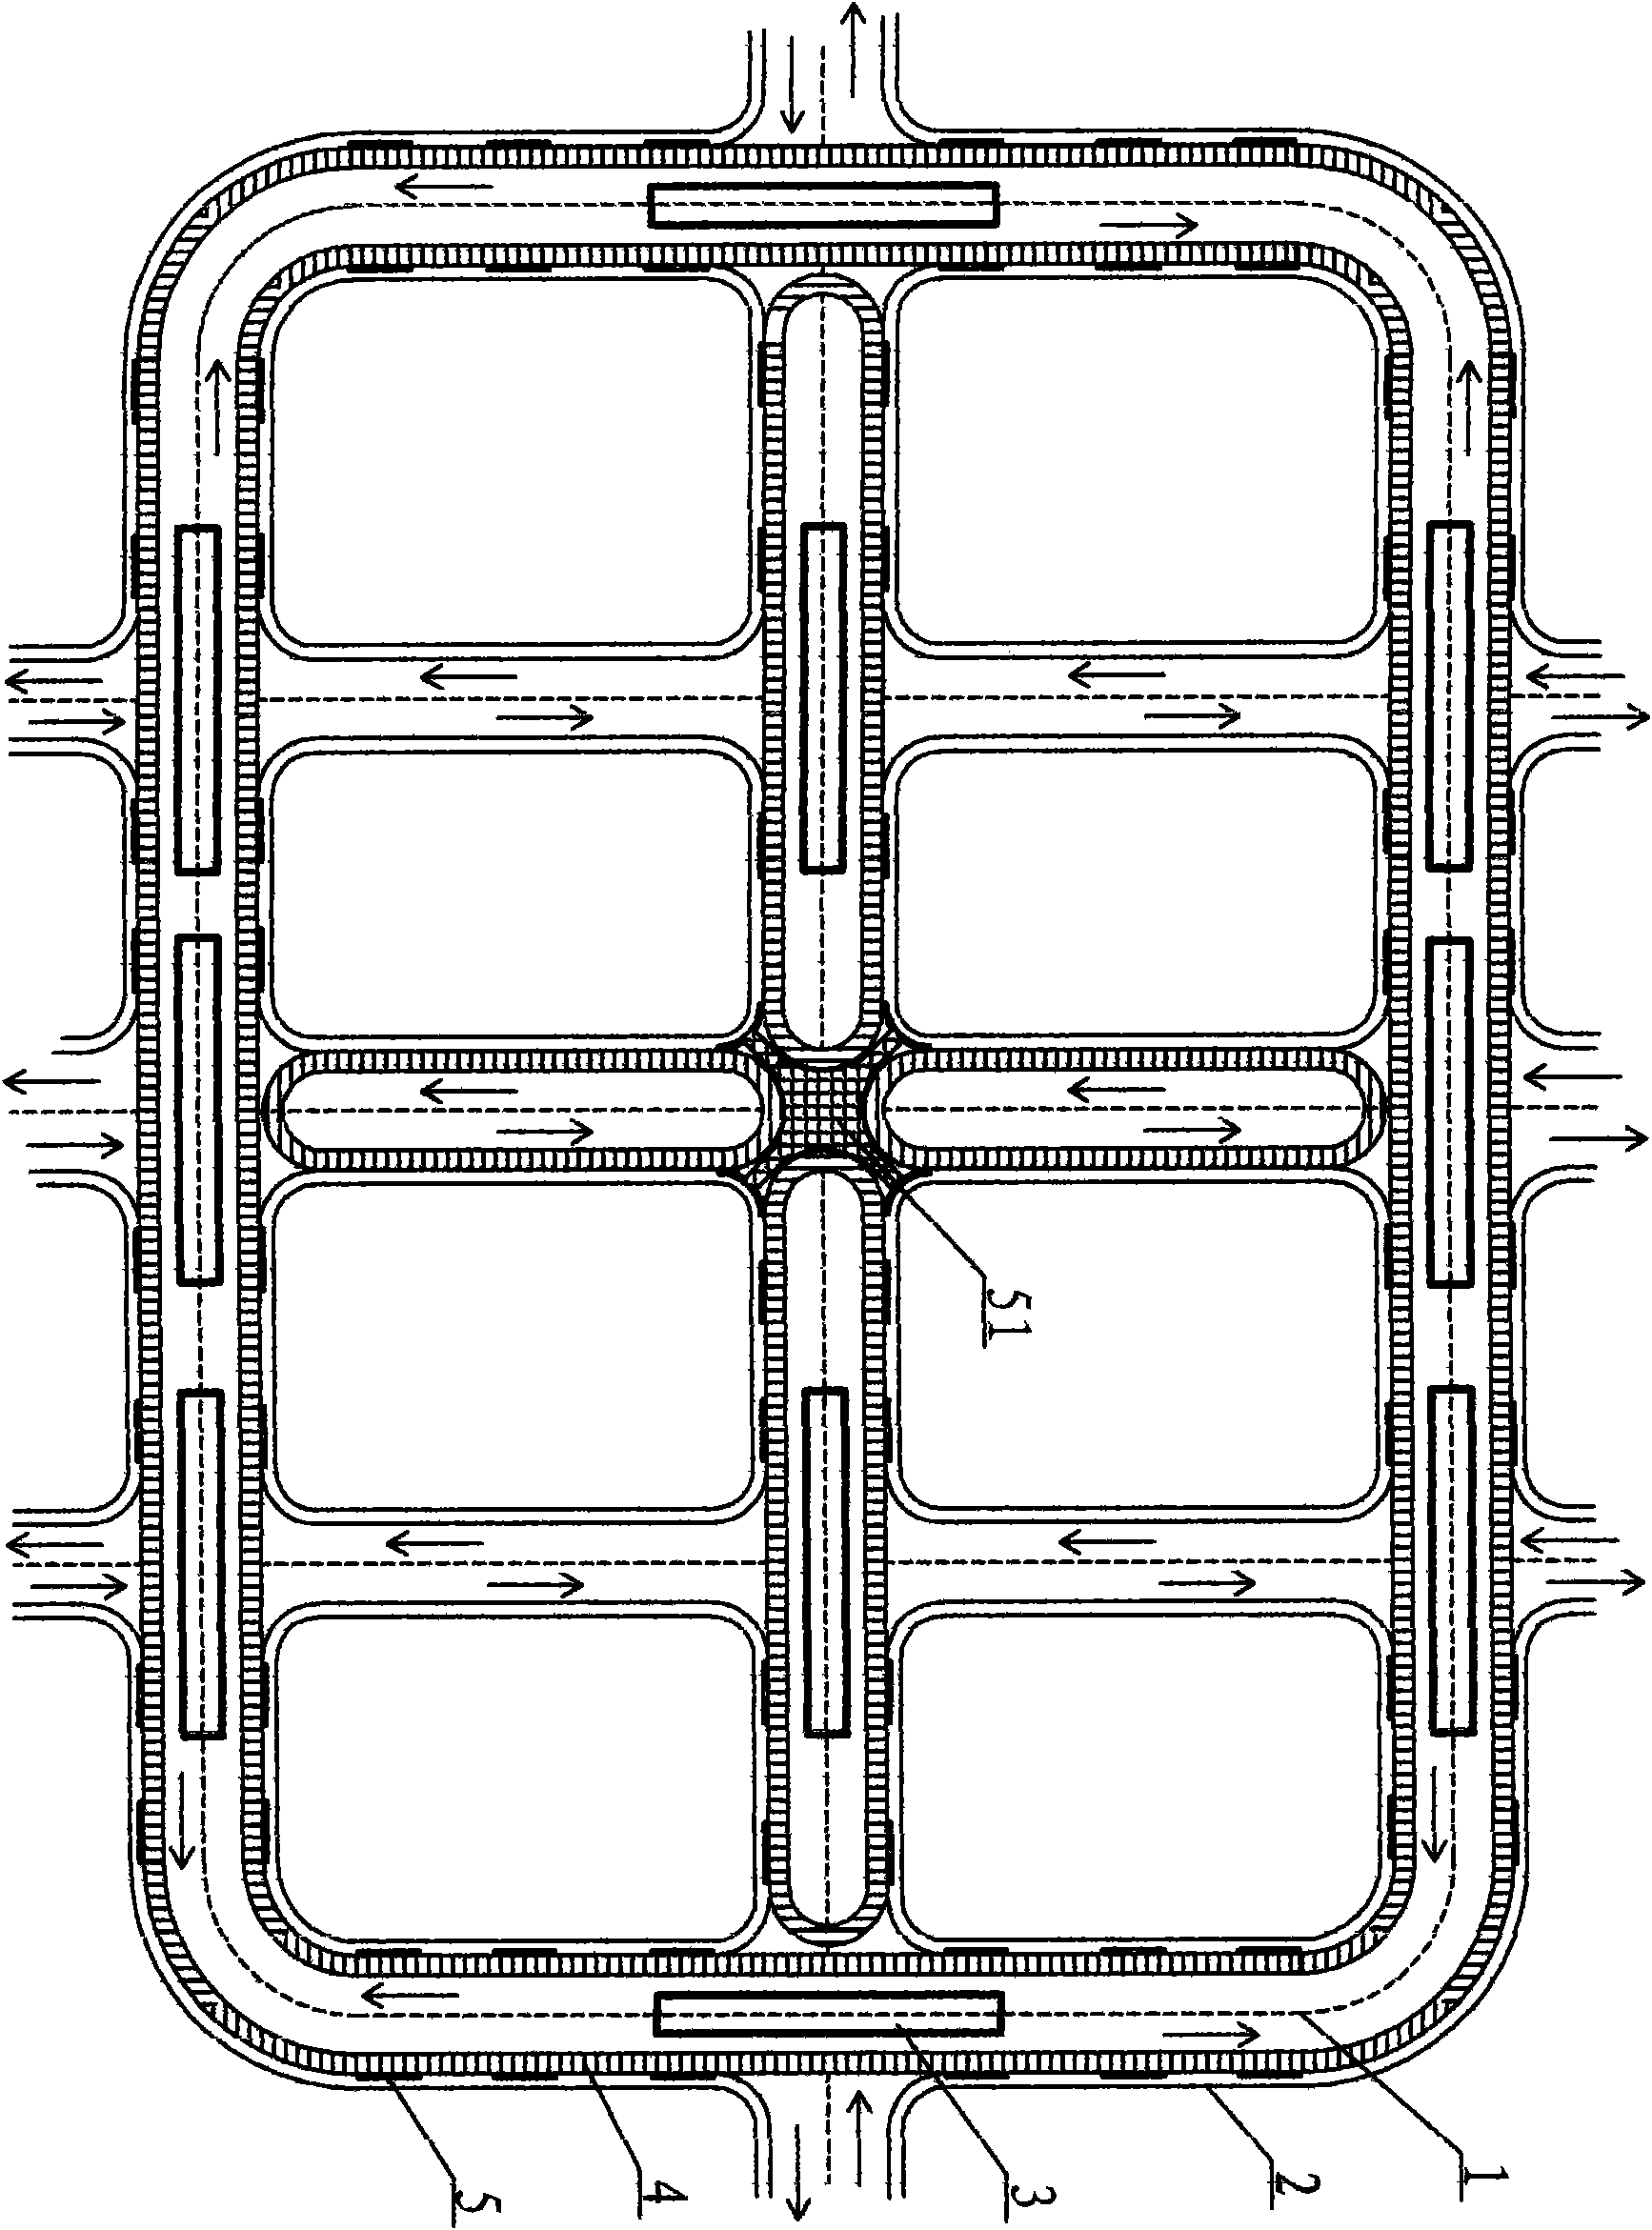 Viaduct conveying type highway